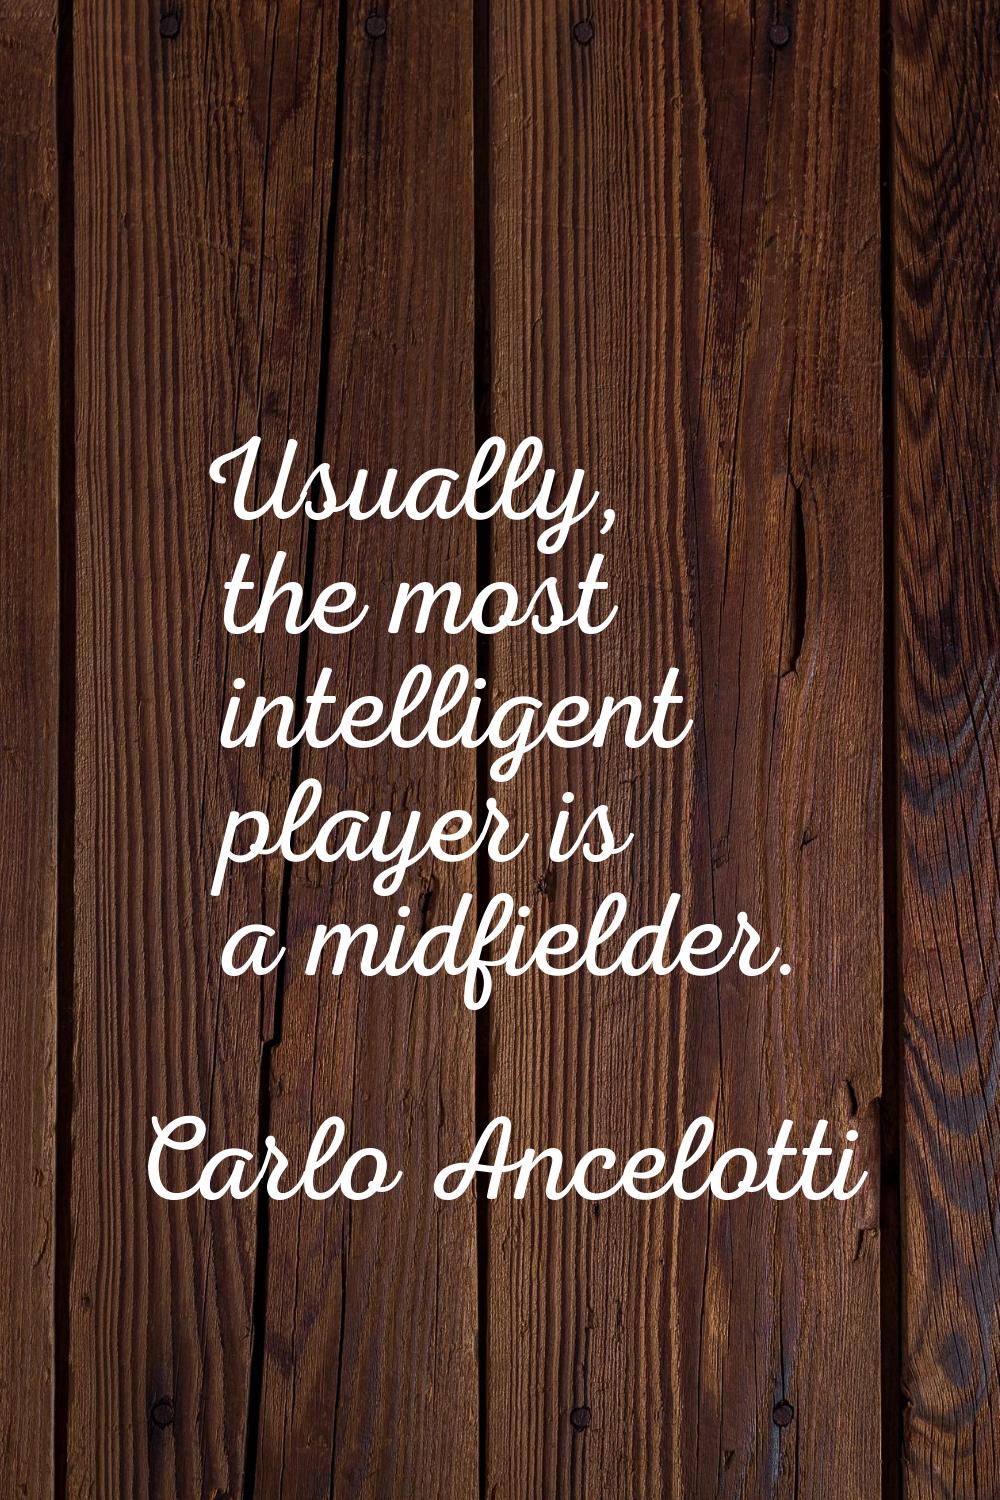 Usually, the most intelligent player is a midfielder.